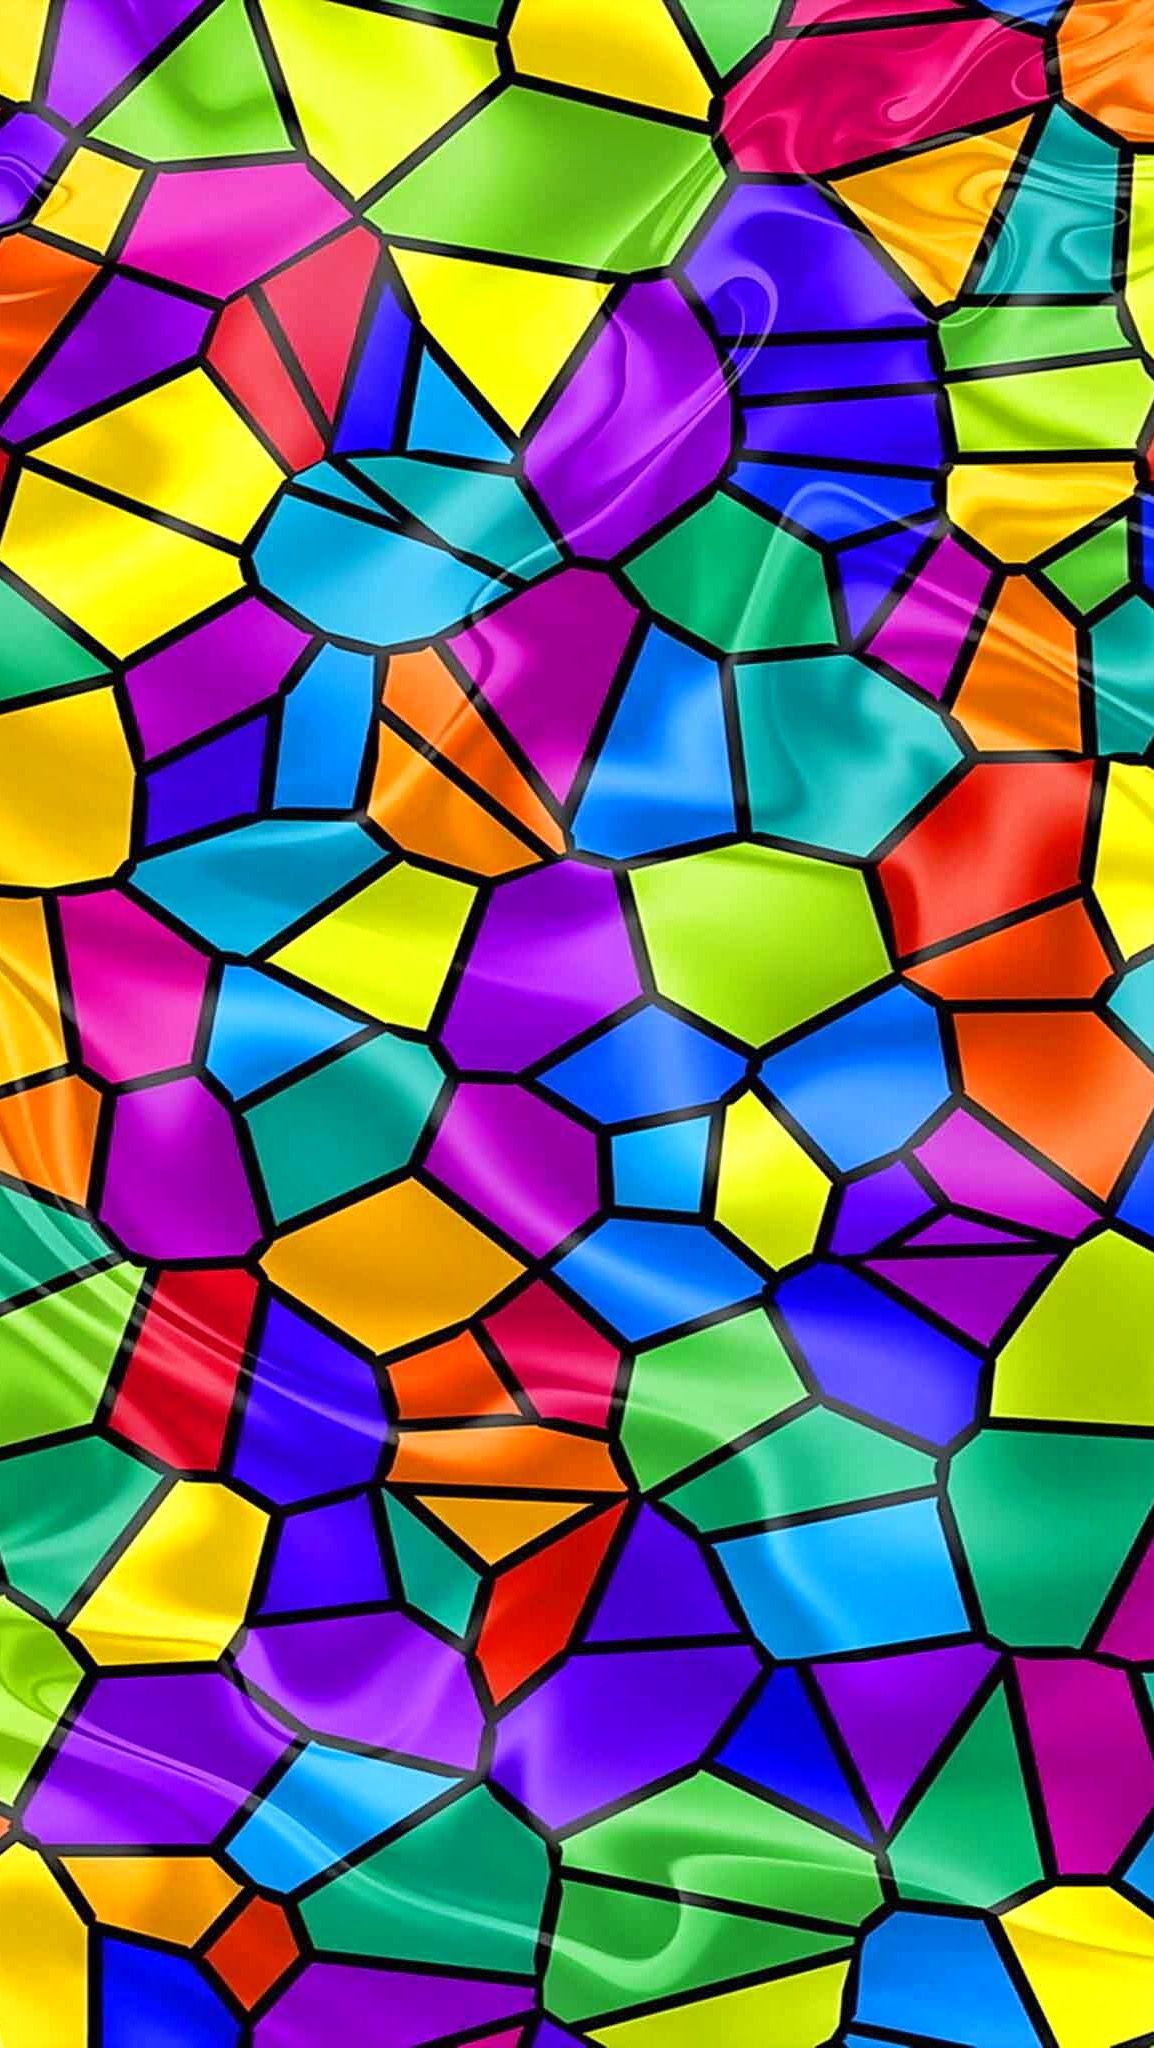 HD iPhone wallpaper Stain glass. Abstract art wallpaper, Rainbow wallpaper, Wallpaper